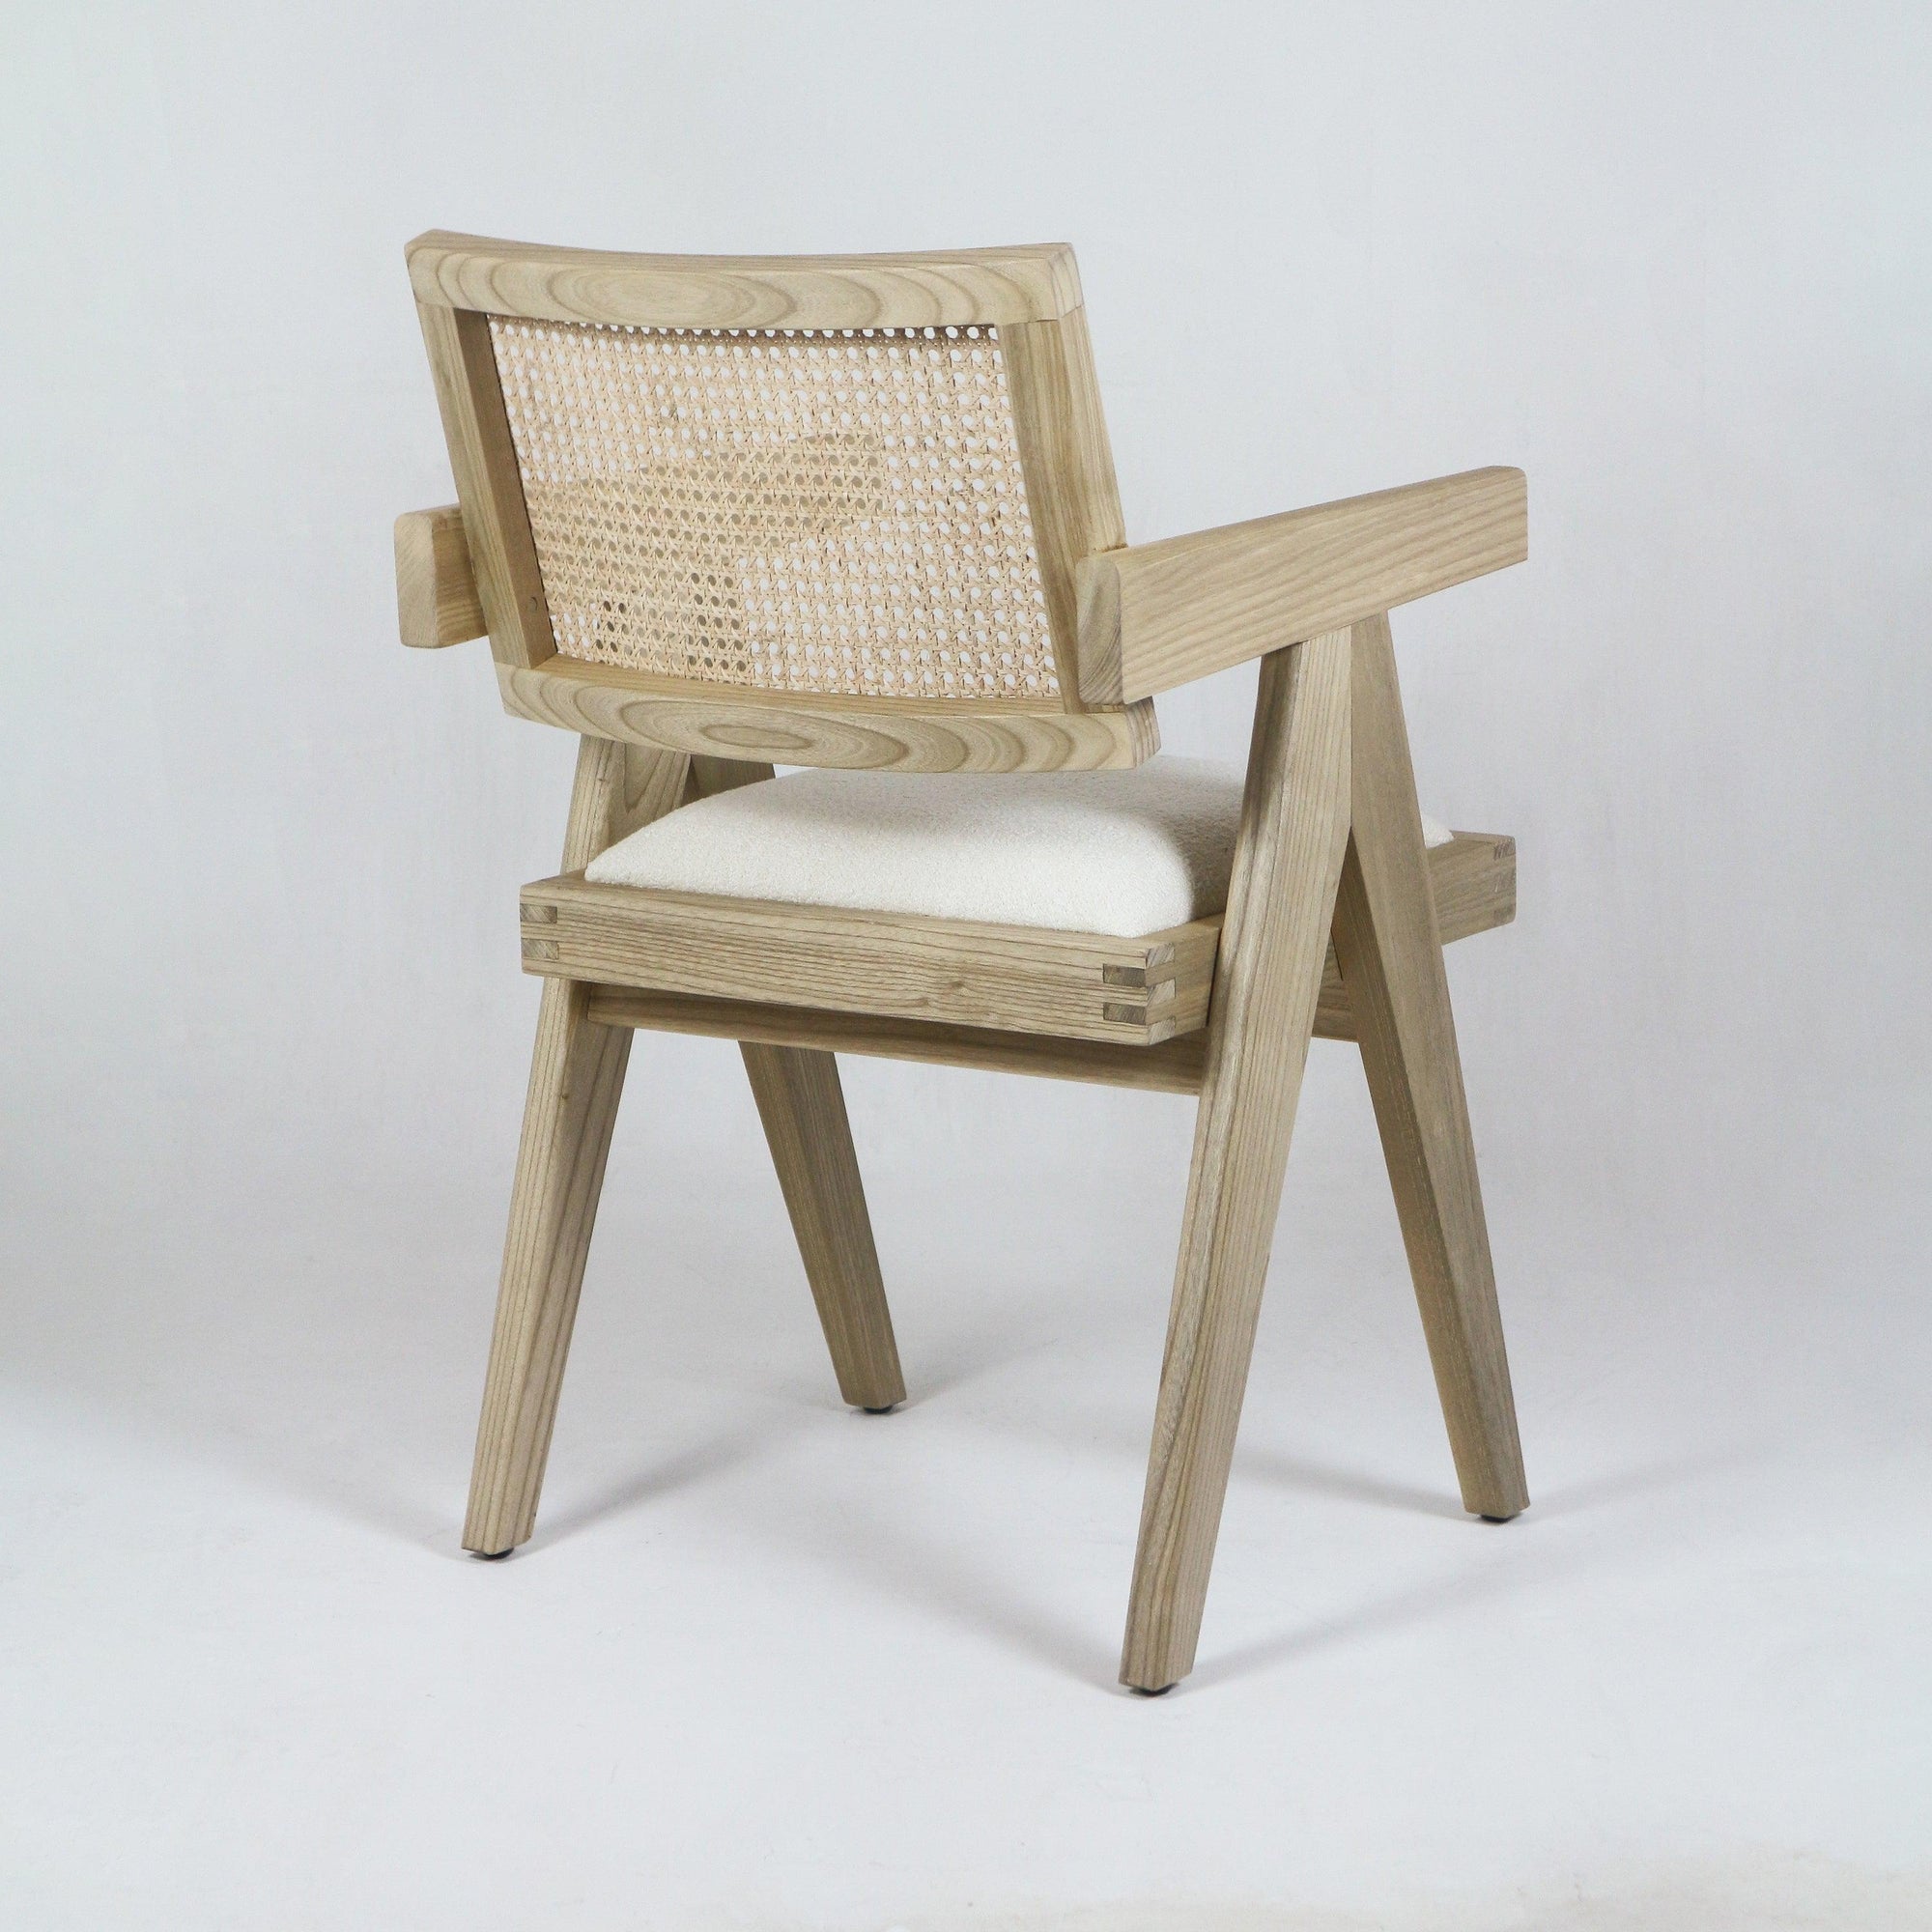 Upholstered Jeanneret Dining or Office Chair Solid Ash - INTERIORTONIC